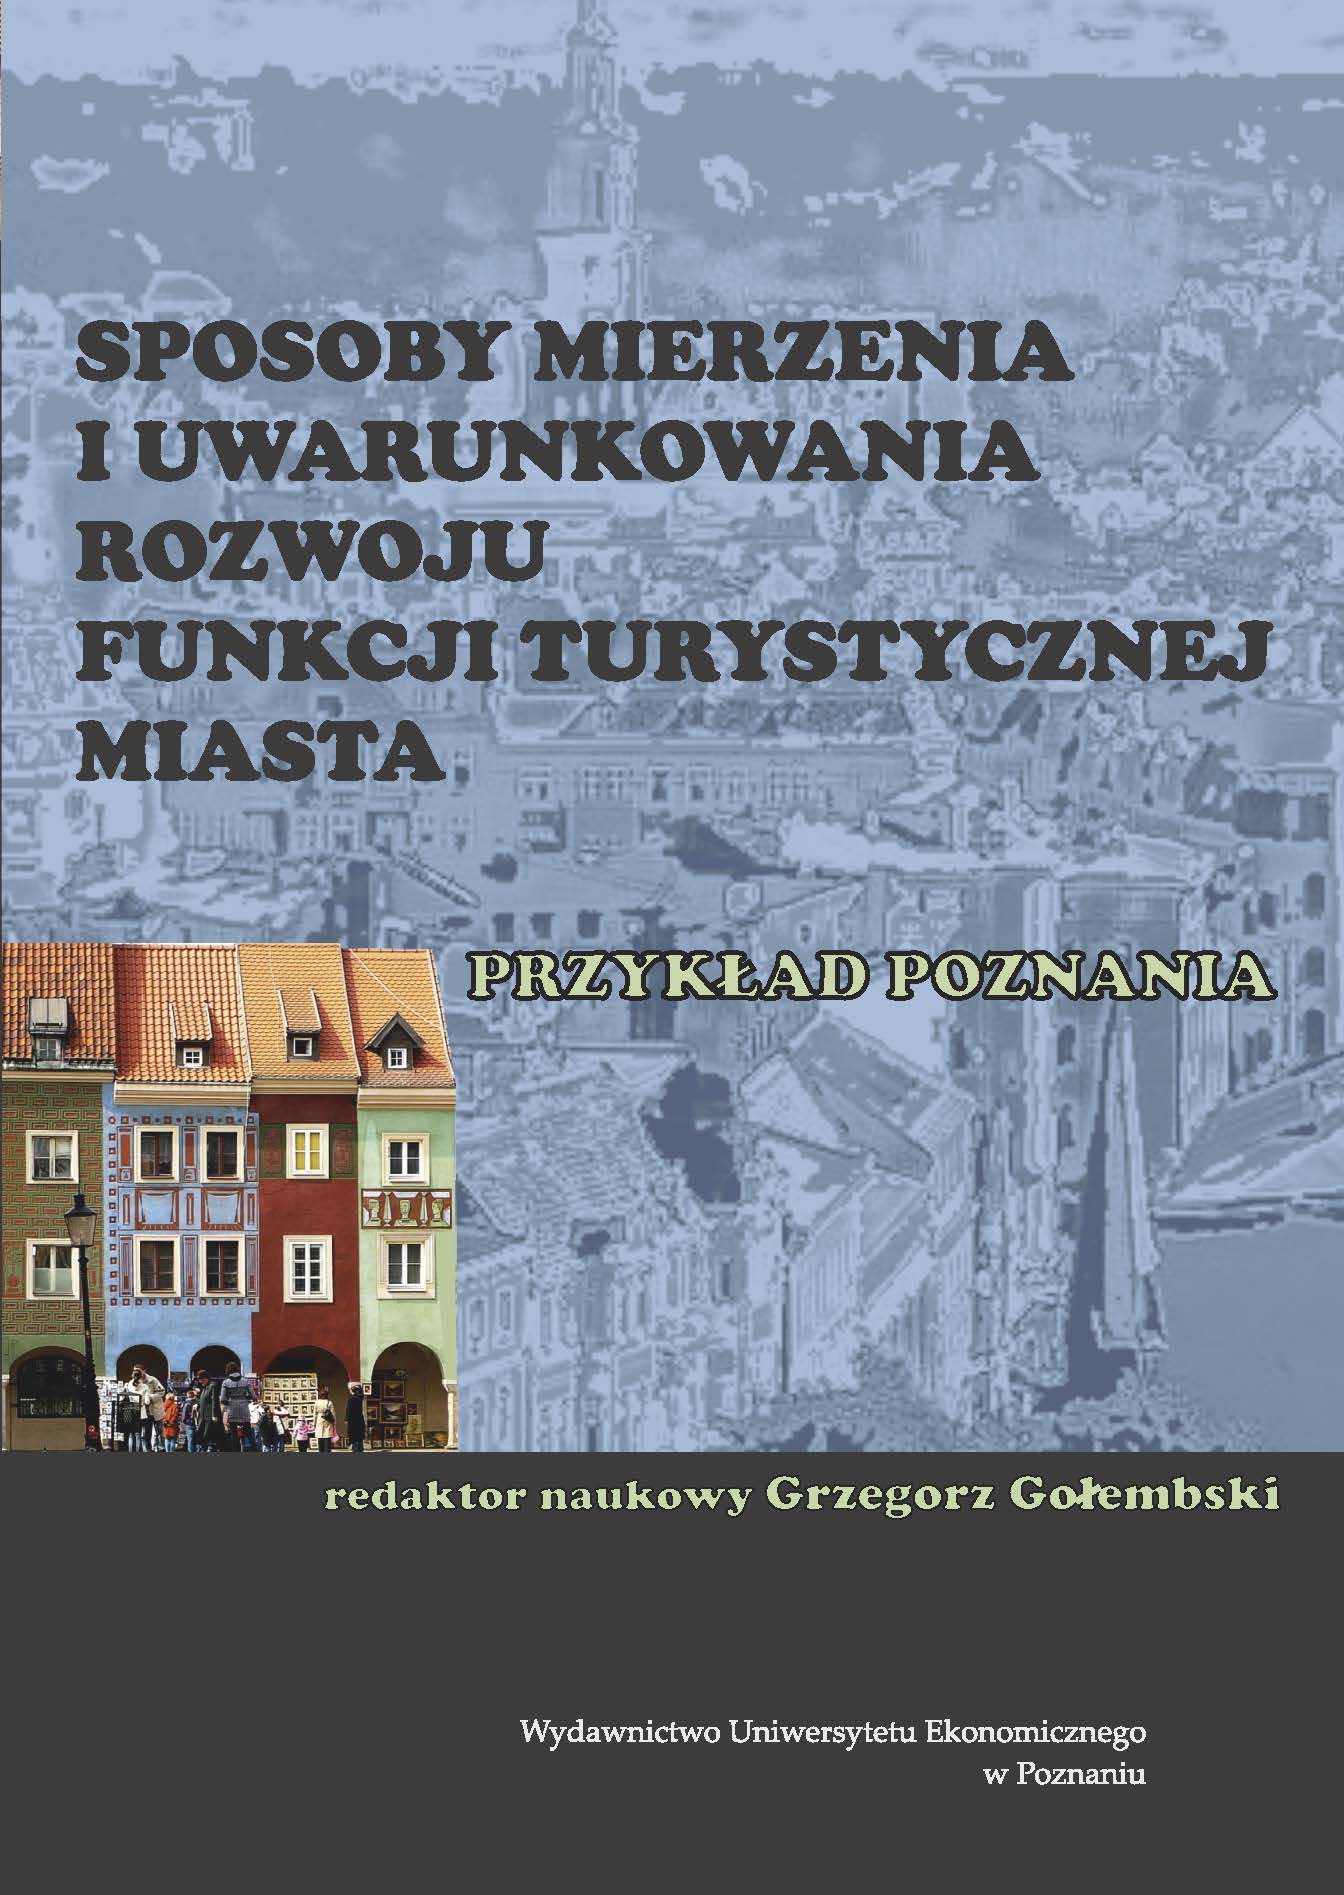 The measurement and evaluation of tourism development in Polish cities in the last decade – comparison of Poznań with the biggest cities in Poland Cover Image